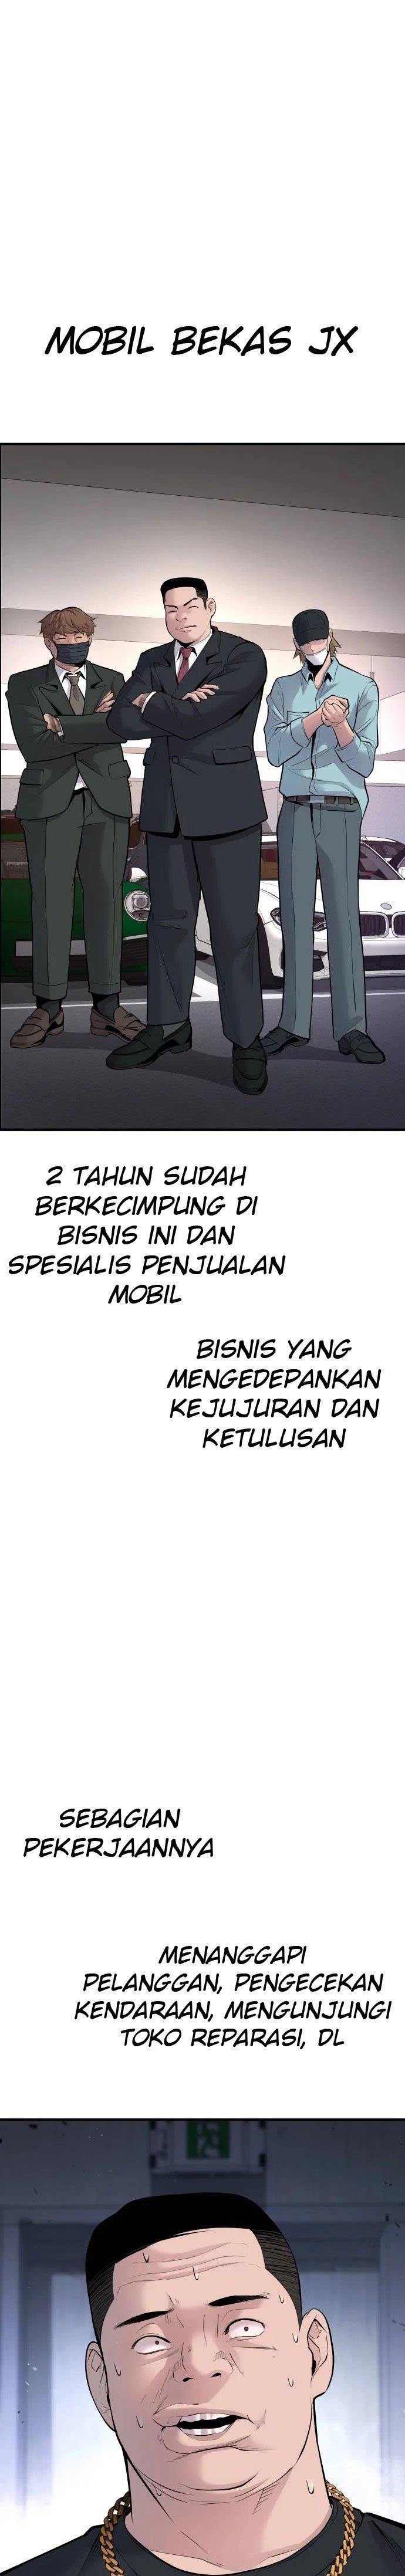 Manager Kim Chapter 48